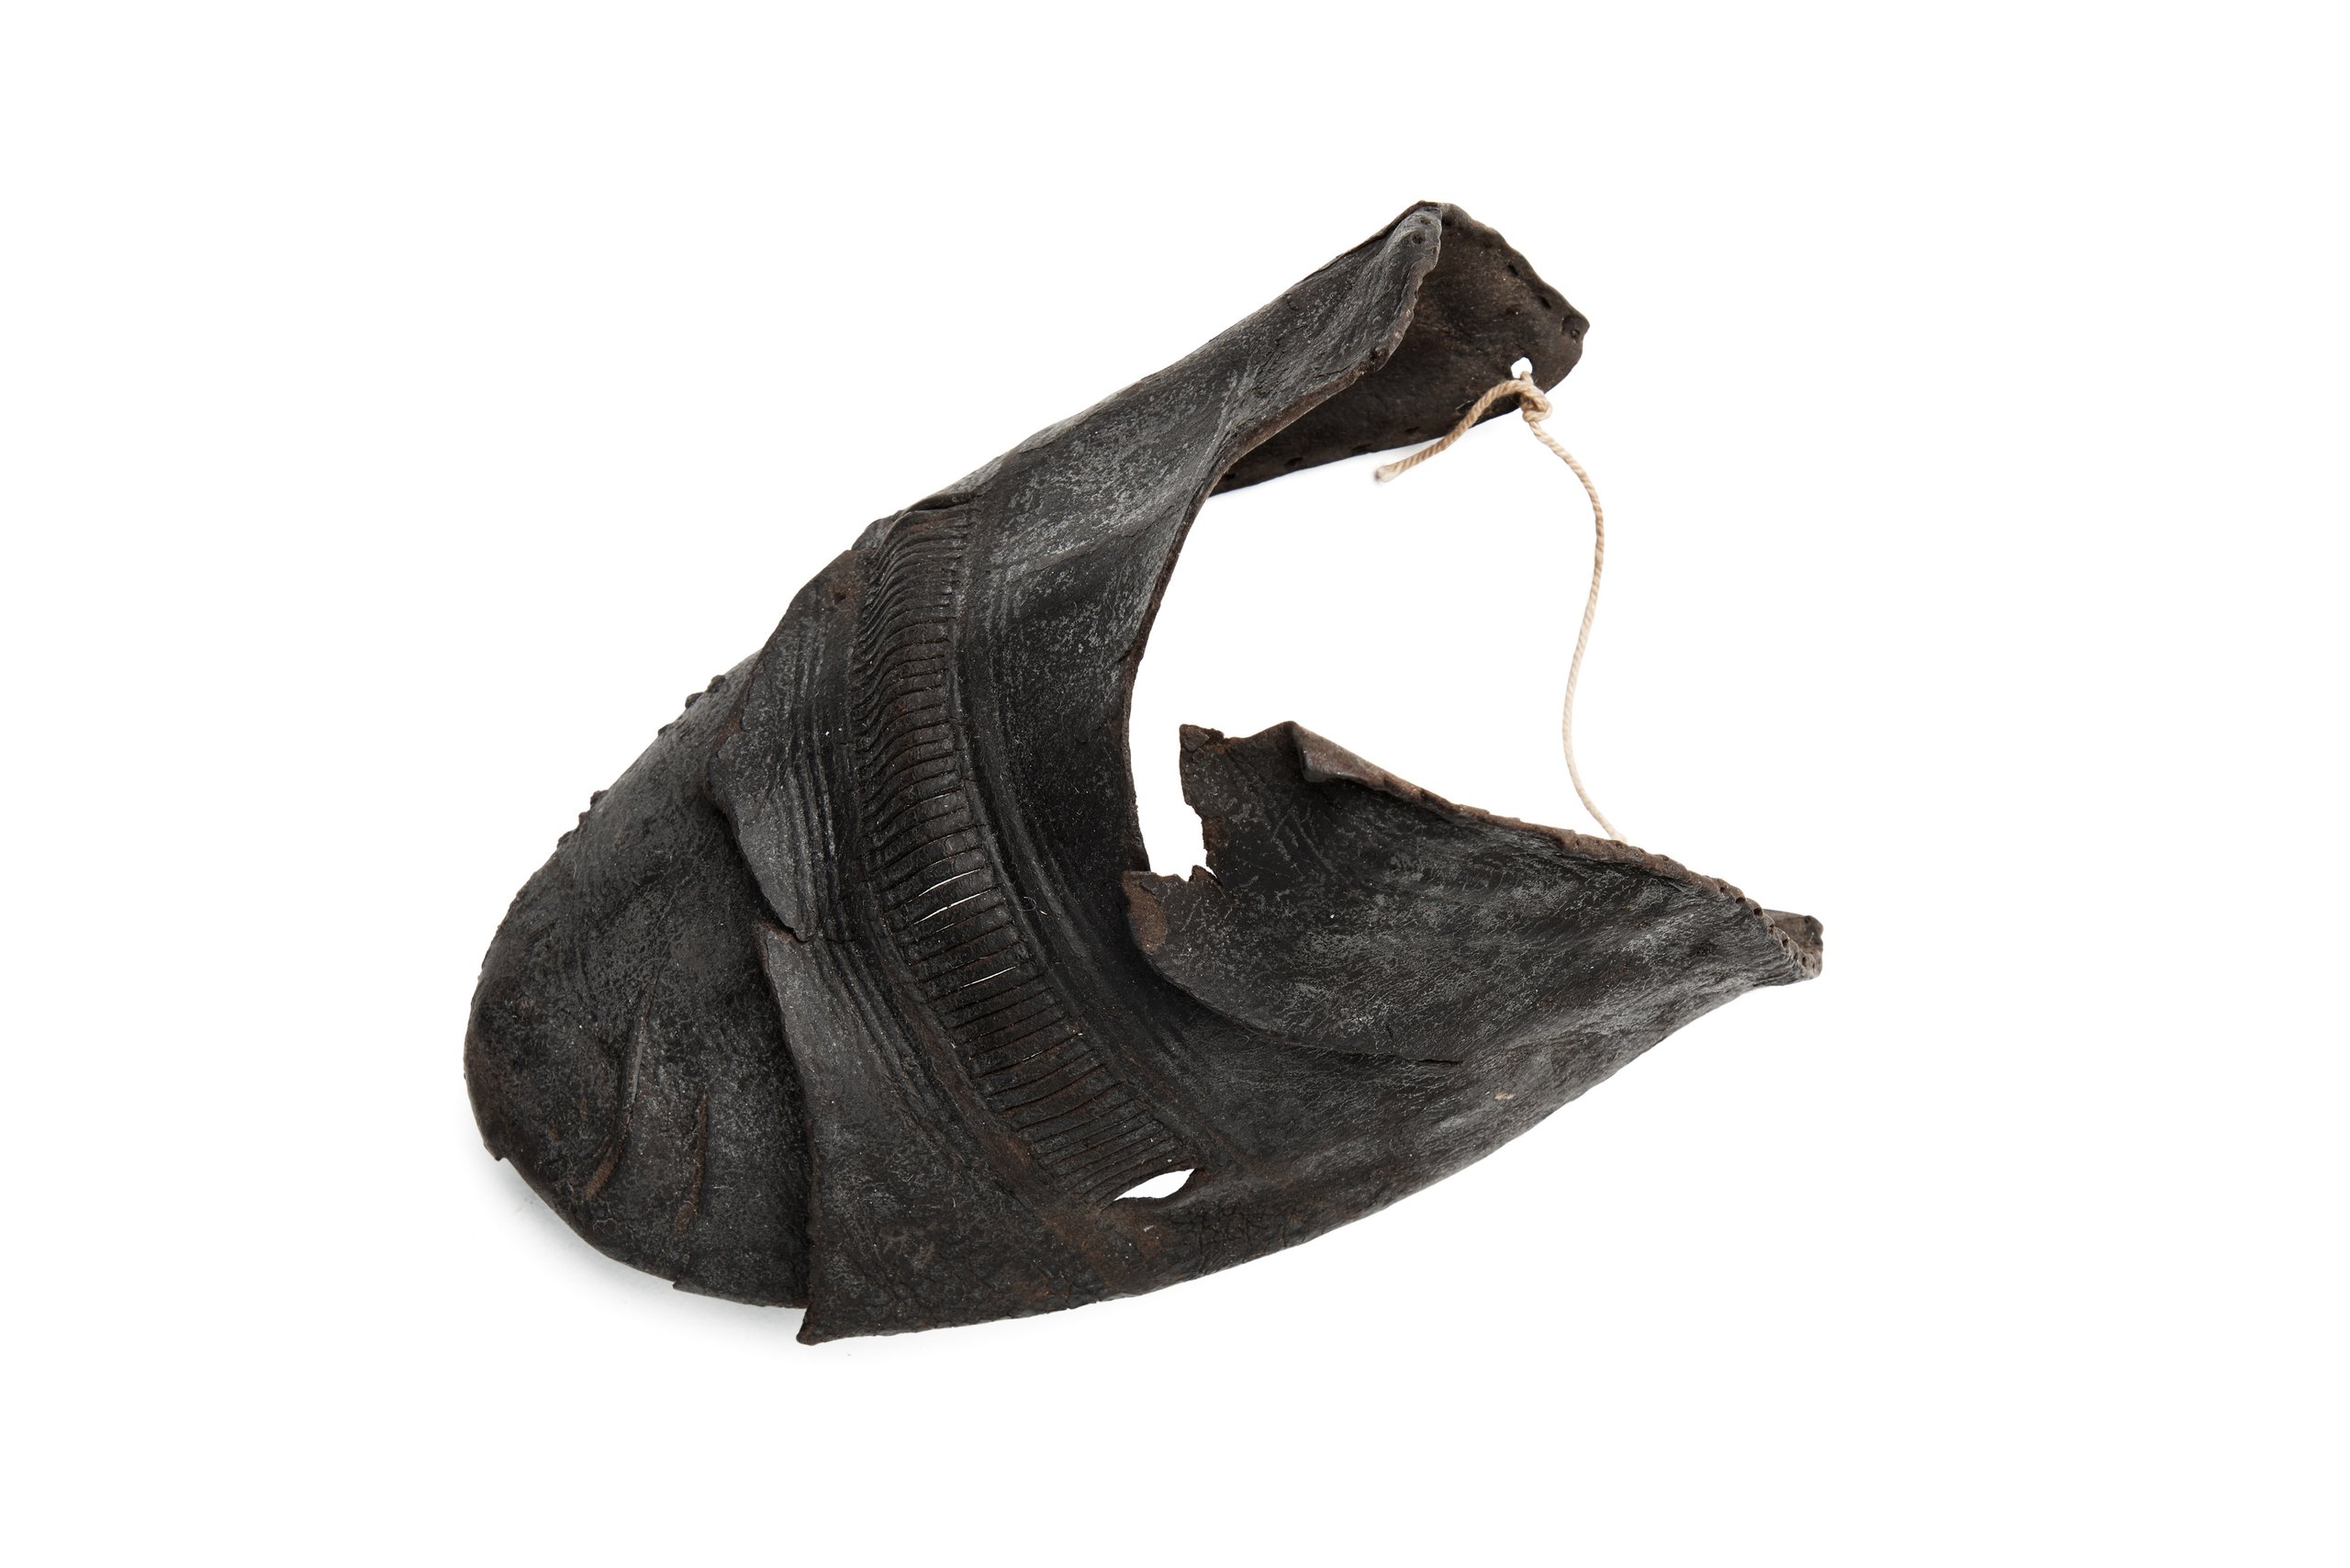 Shoe vamp fragment from the Joseph Box collection